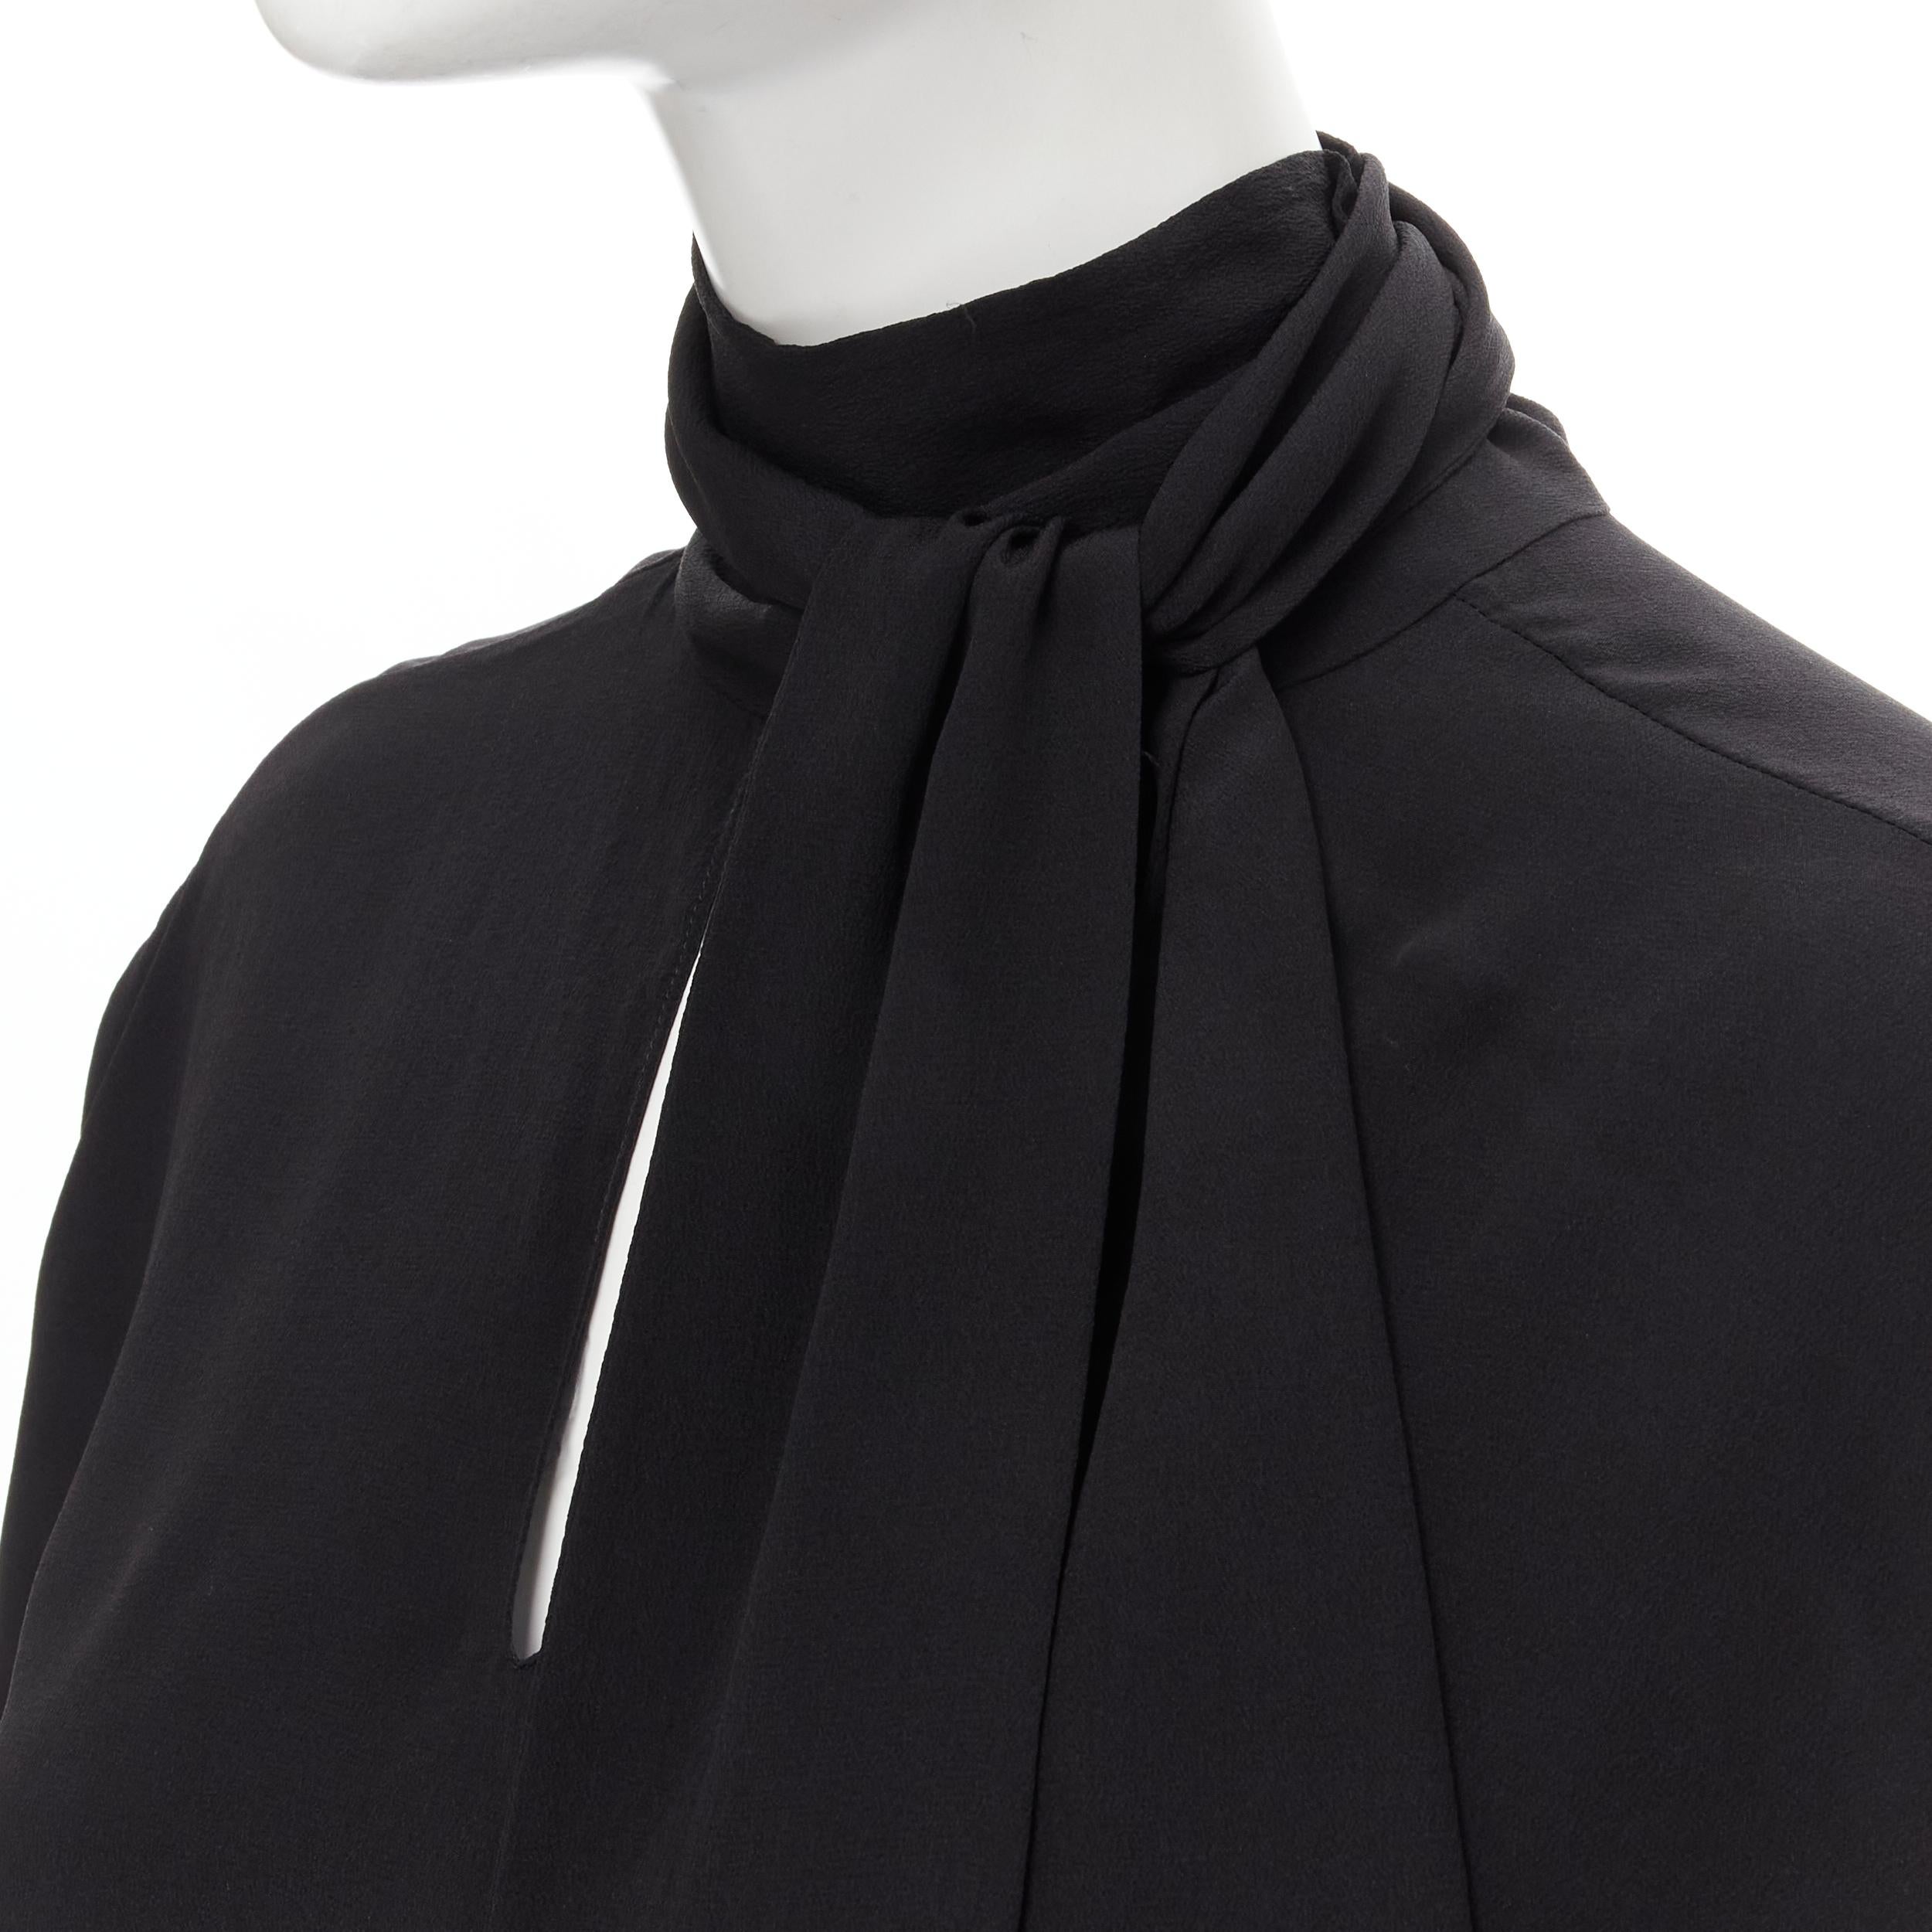 BALENCIAGA 2016 Archetype dipped back pussy bow silk blouse top FR34 XS 
Reference: MELK/A00123 
Brand: Balenciaga 
Designer: Demna 
Collection: 2016 
Material: Silk 
Color: Black 
Pattern: Solid 
Extra Detail: V-neck. Dipped back. Attached pussy